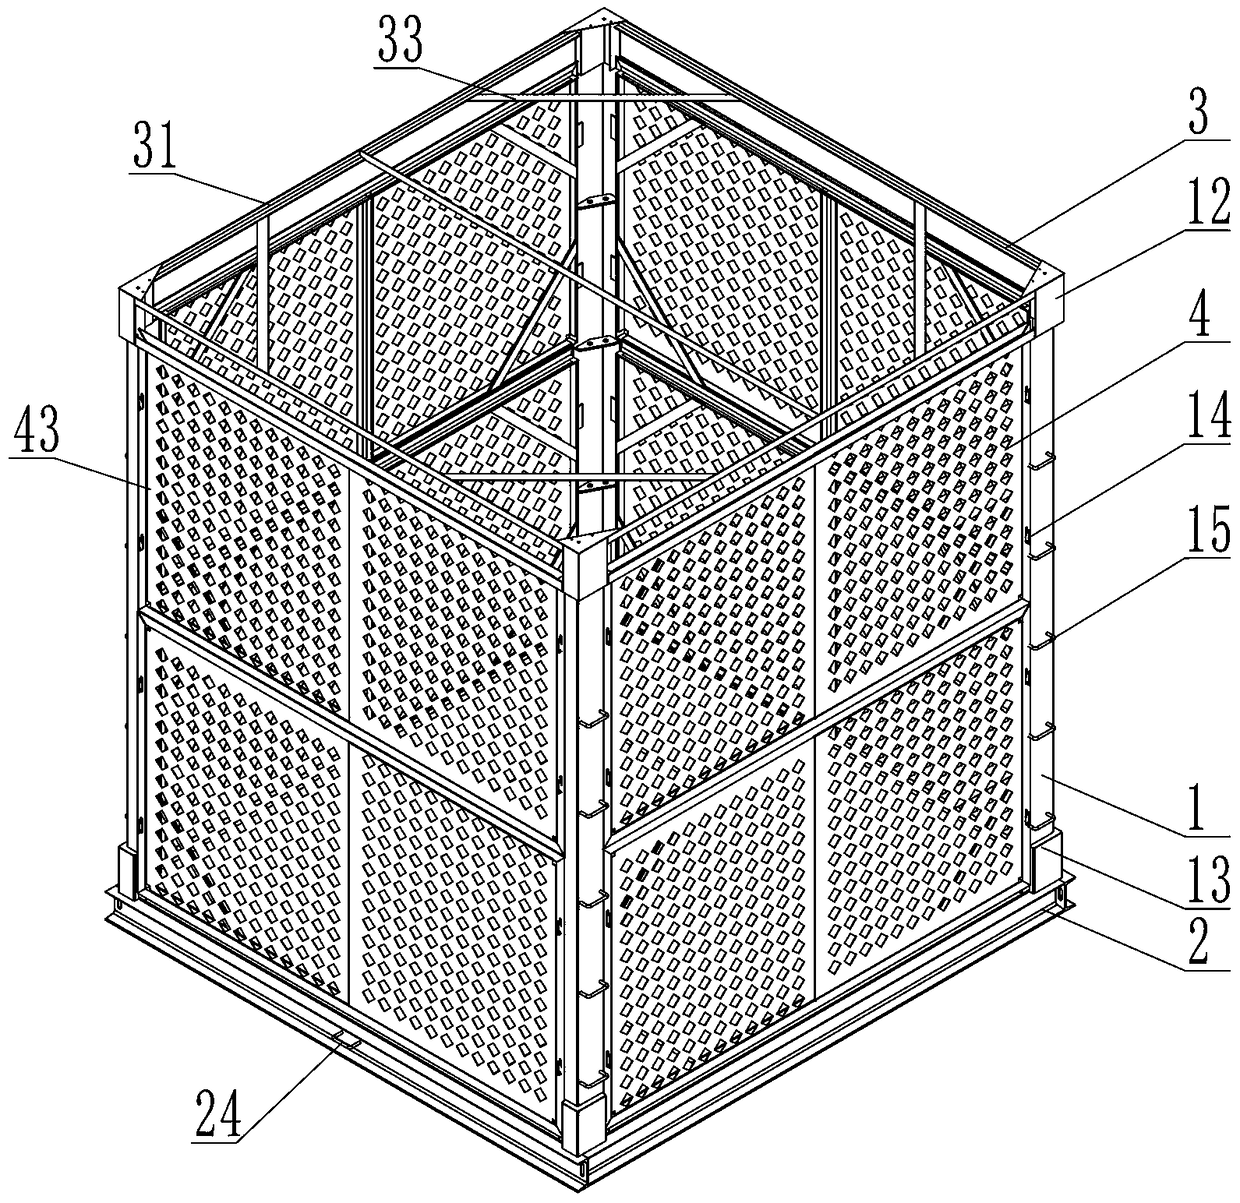 Net body tray container capable of being detachably combined